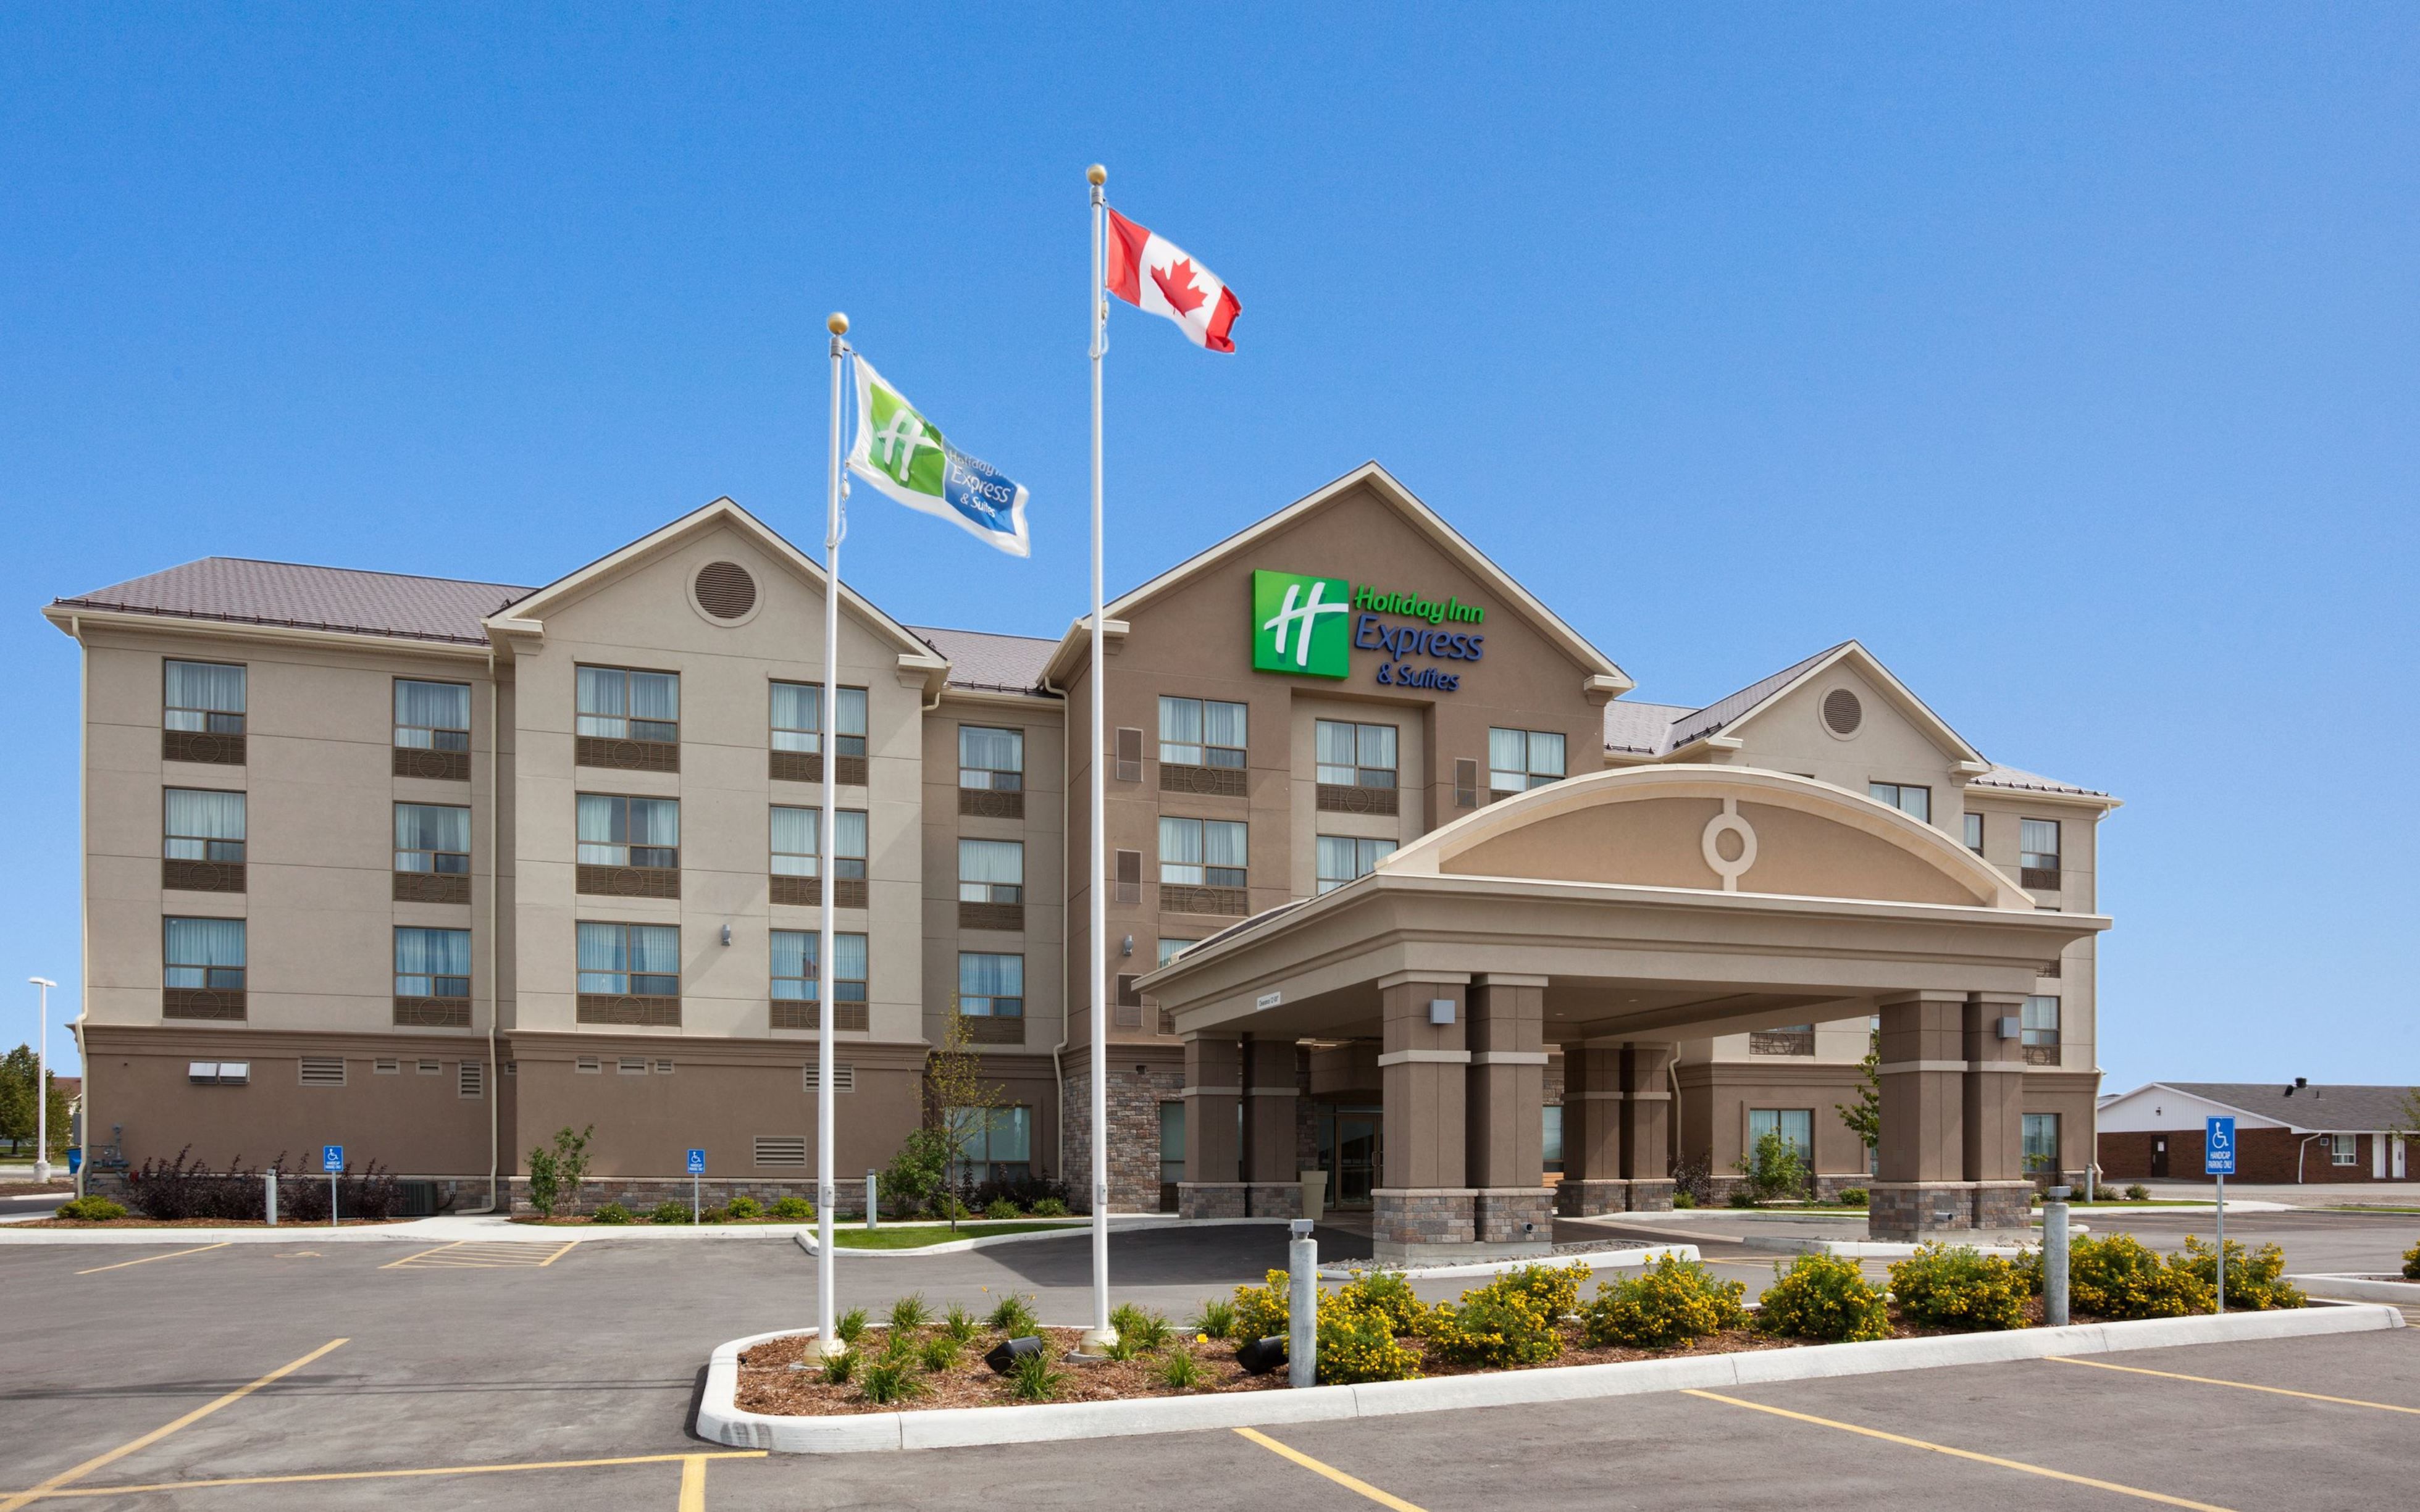 Holiday Inn Express & Suites New Castle, New Castle Pennsylvania  picture pic